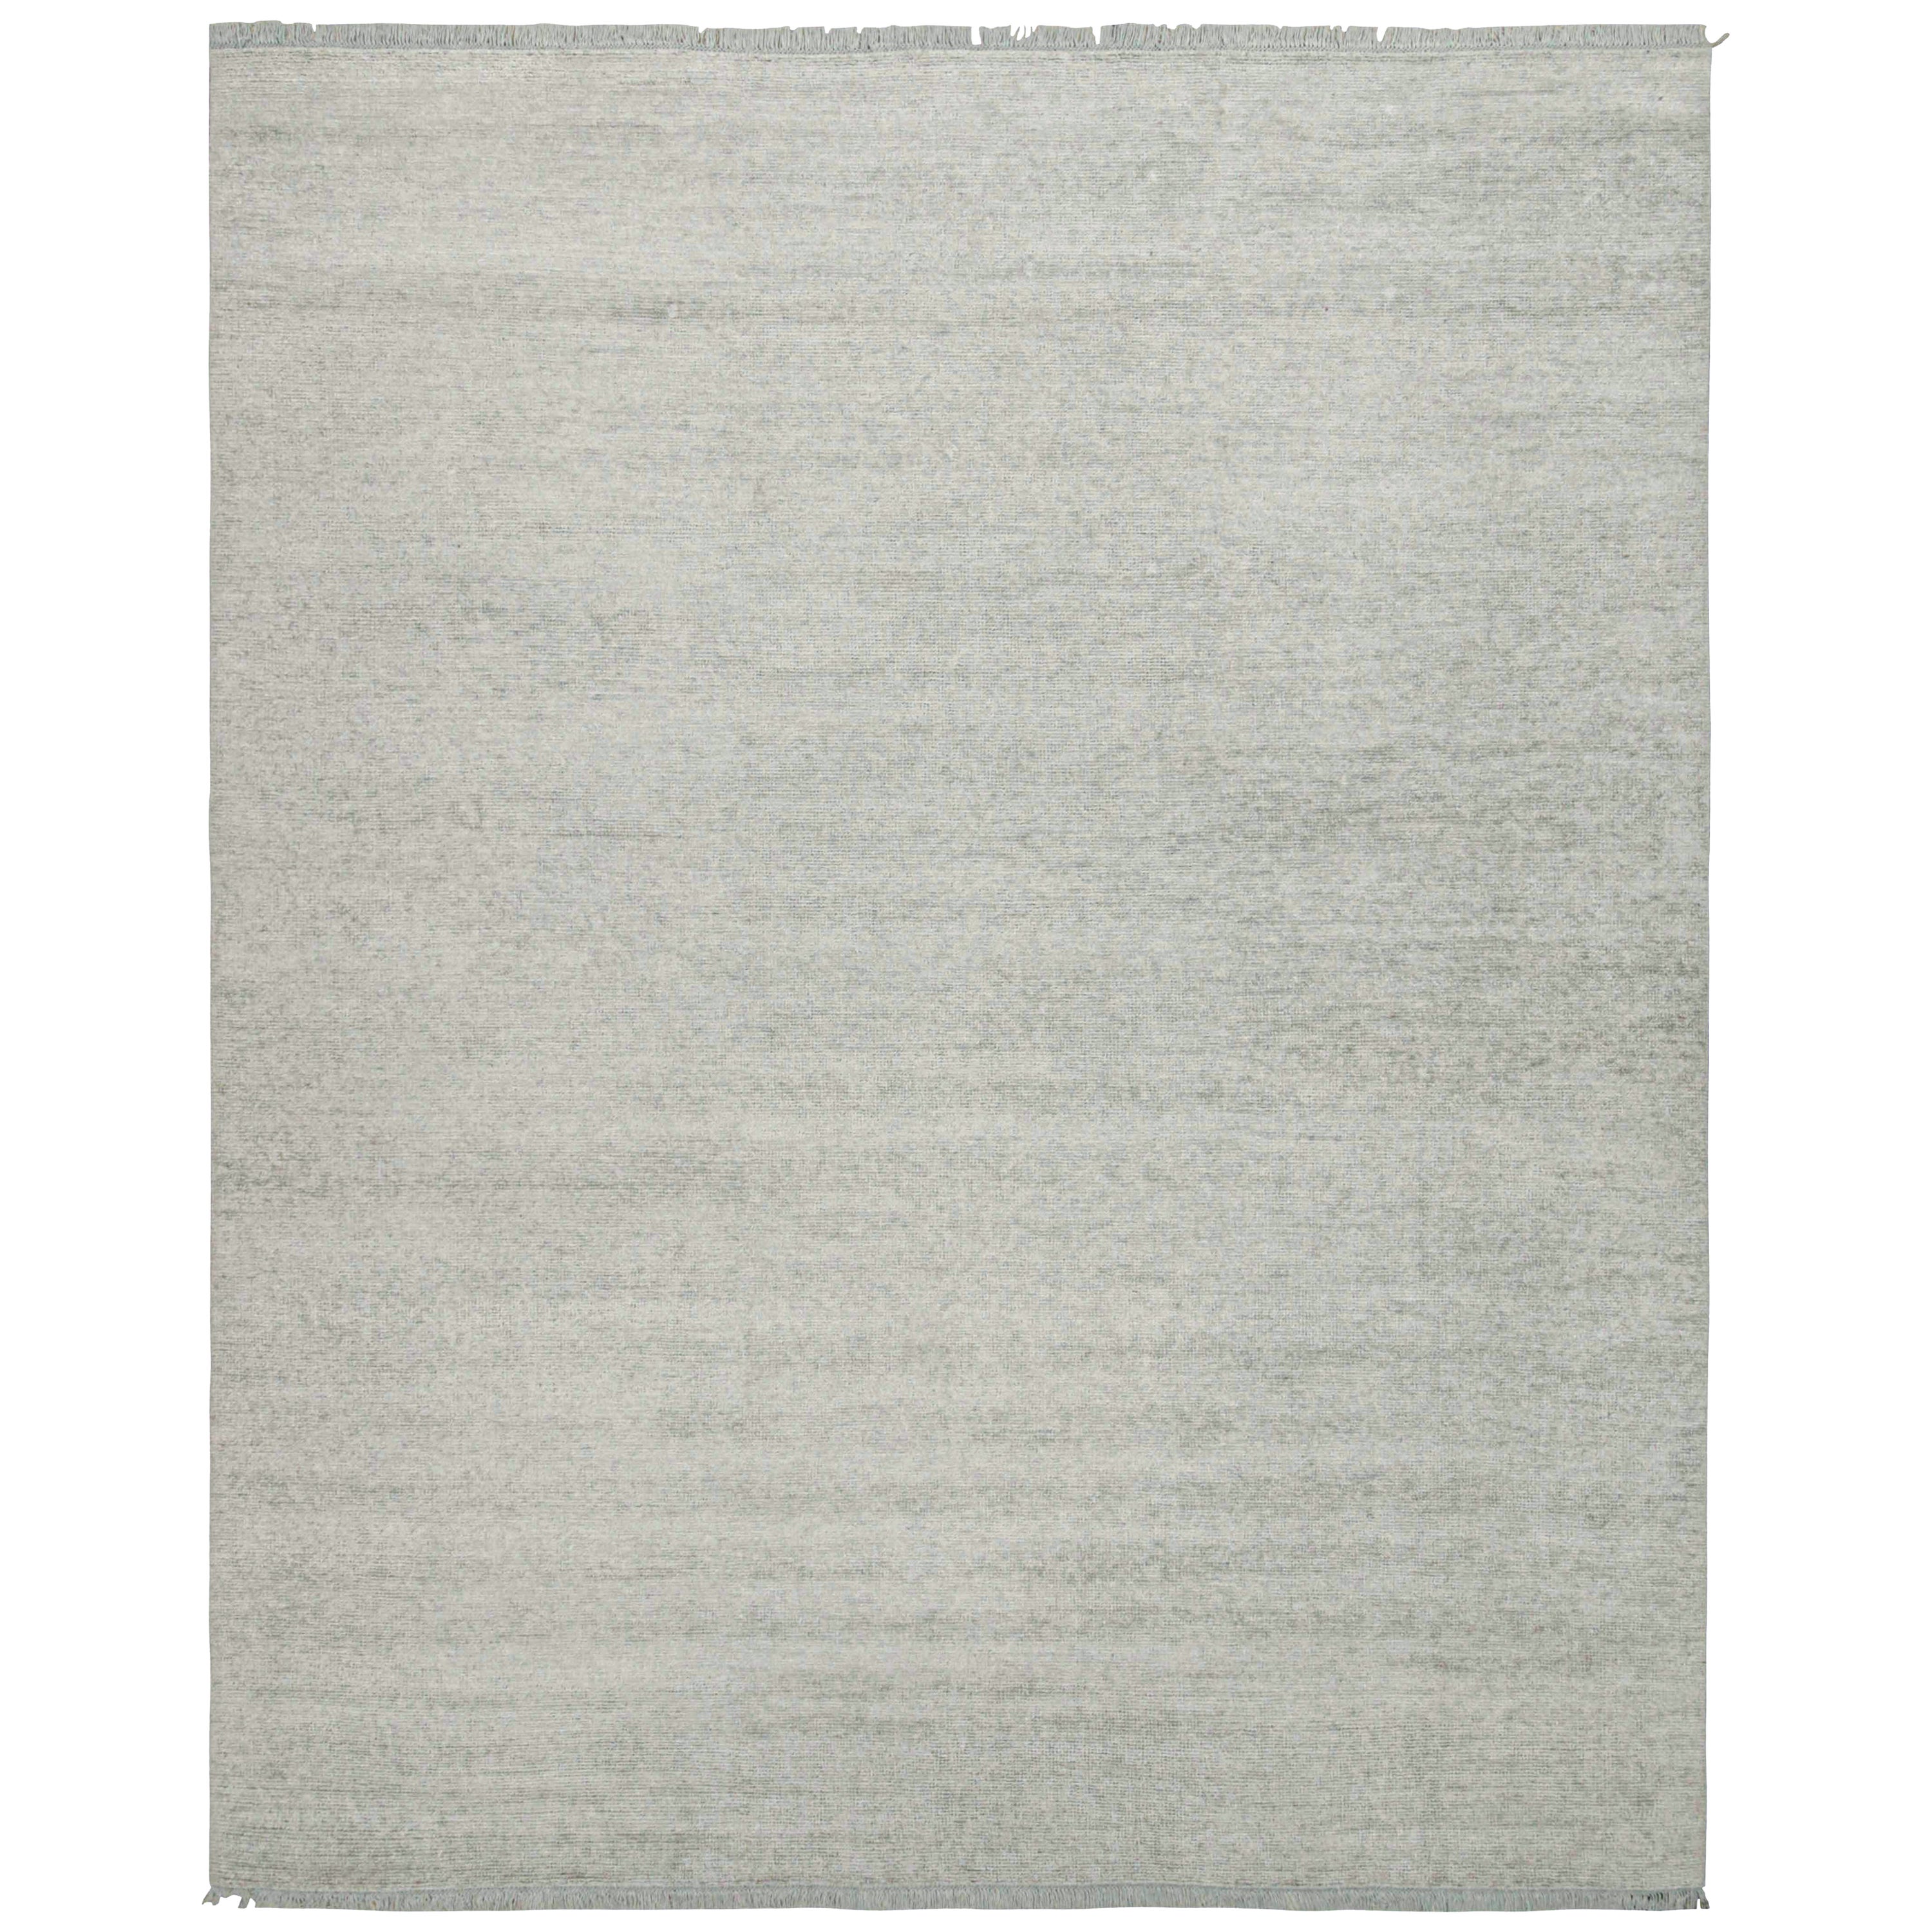 This 12x15 rug is a grand new entry to Rug & Kilim’s Modern rug collection.

Connoisseurs will note this piece is from our new Light on Loom line, which includes quicker custom capabilities than ever before. This piece and others like it can also be